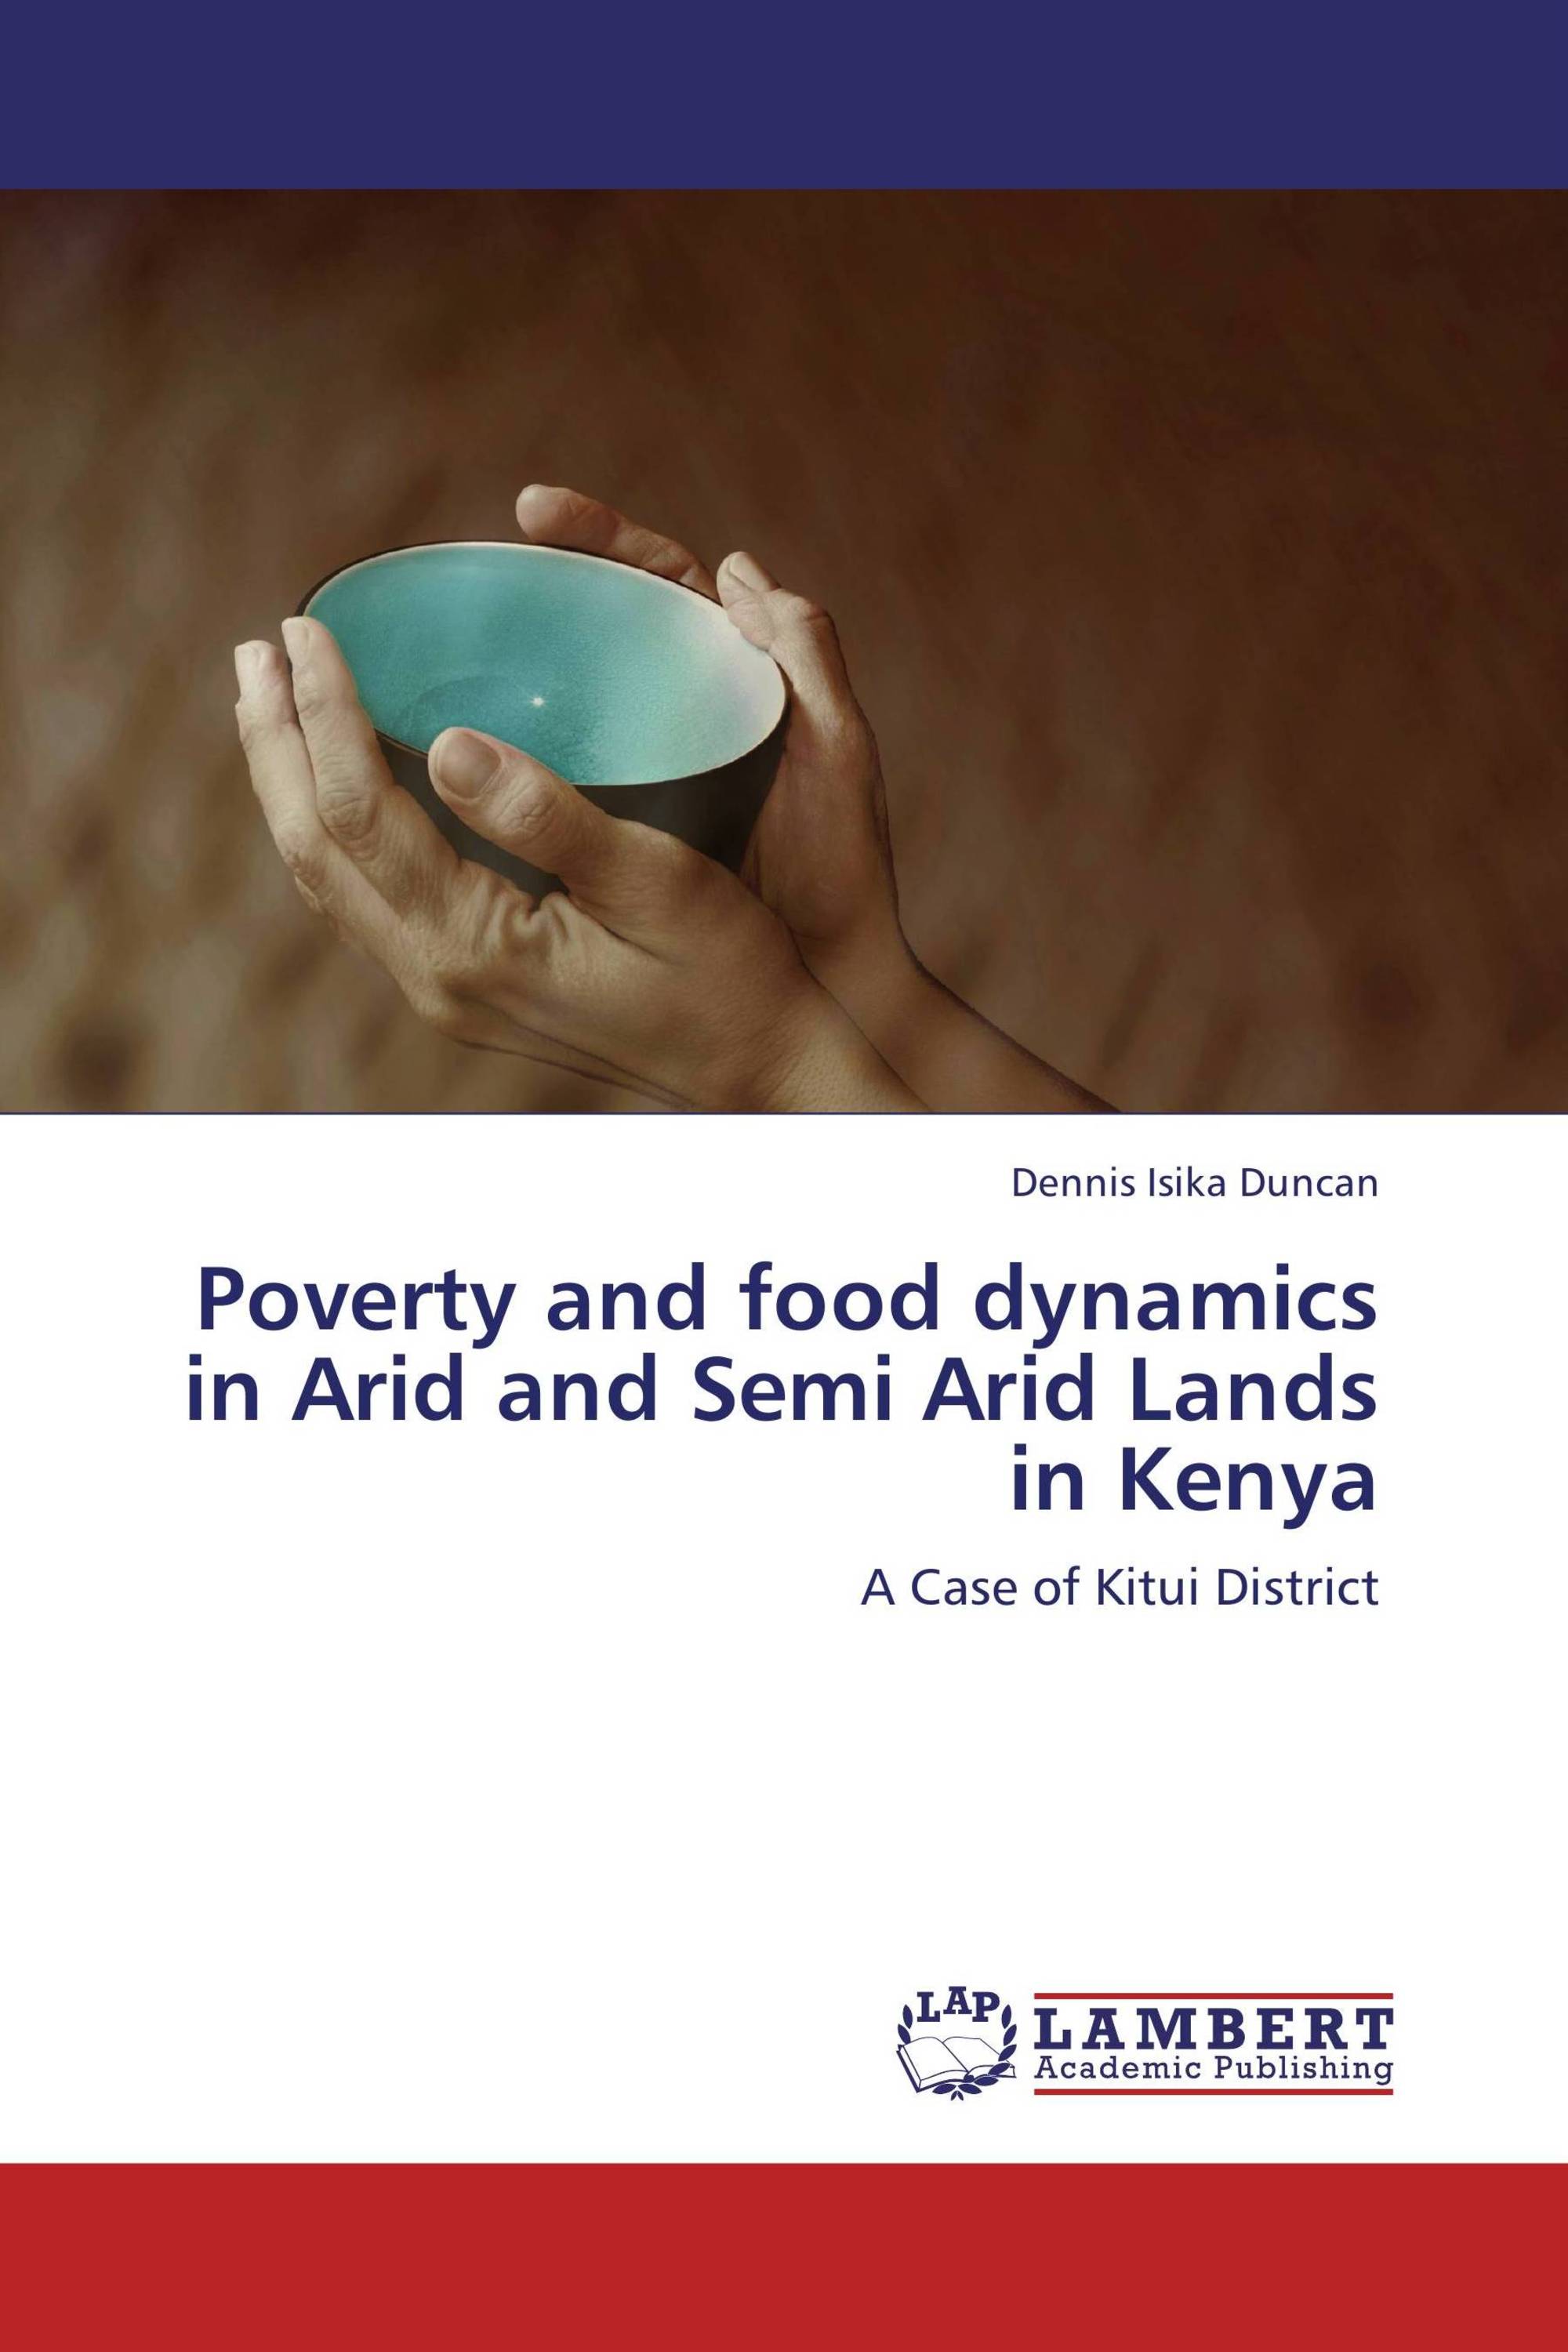 Poverty and food dynamics in Arid and Semi Arid Lands in Kenya